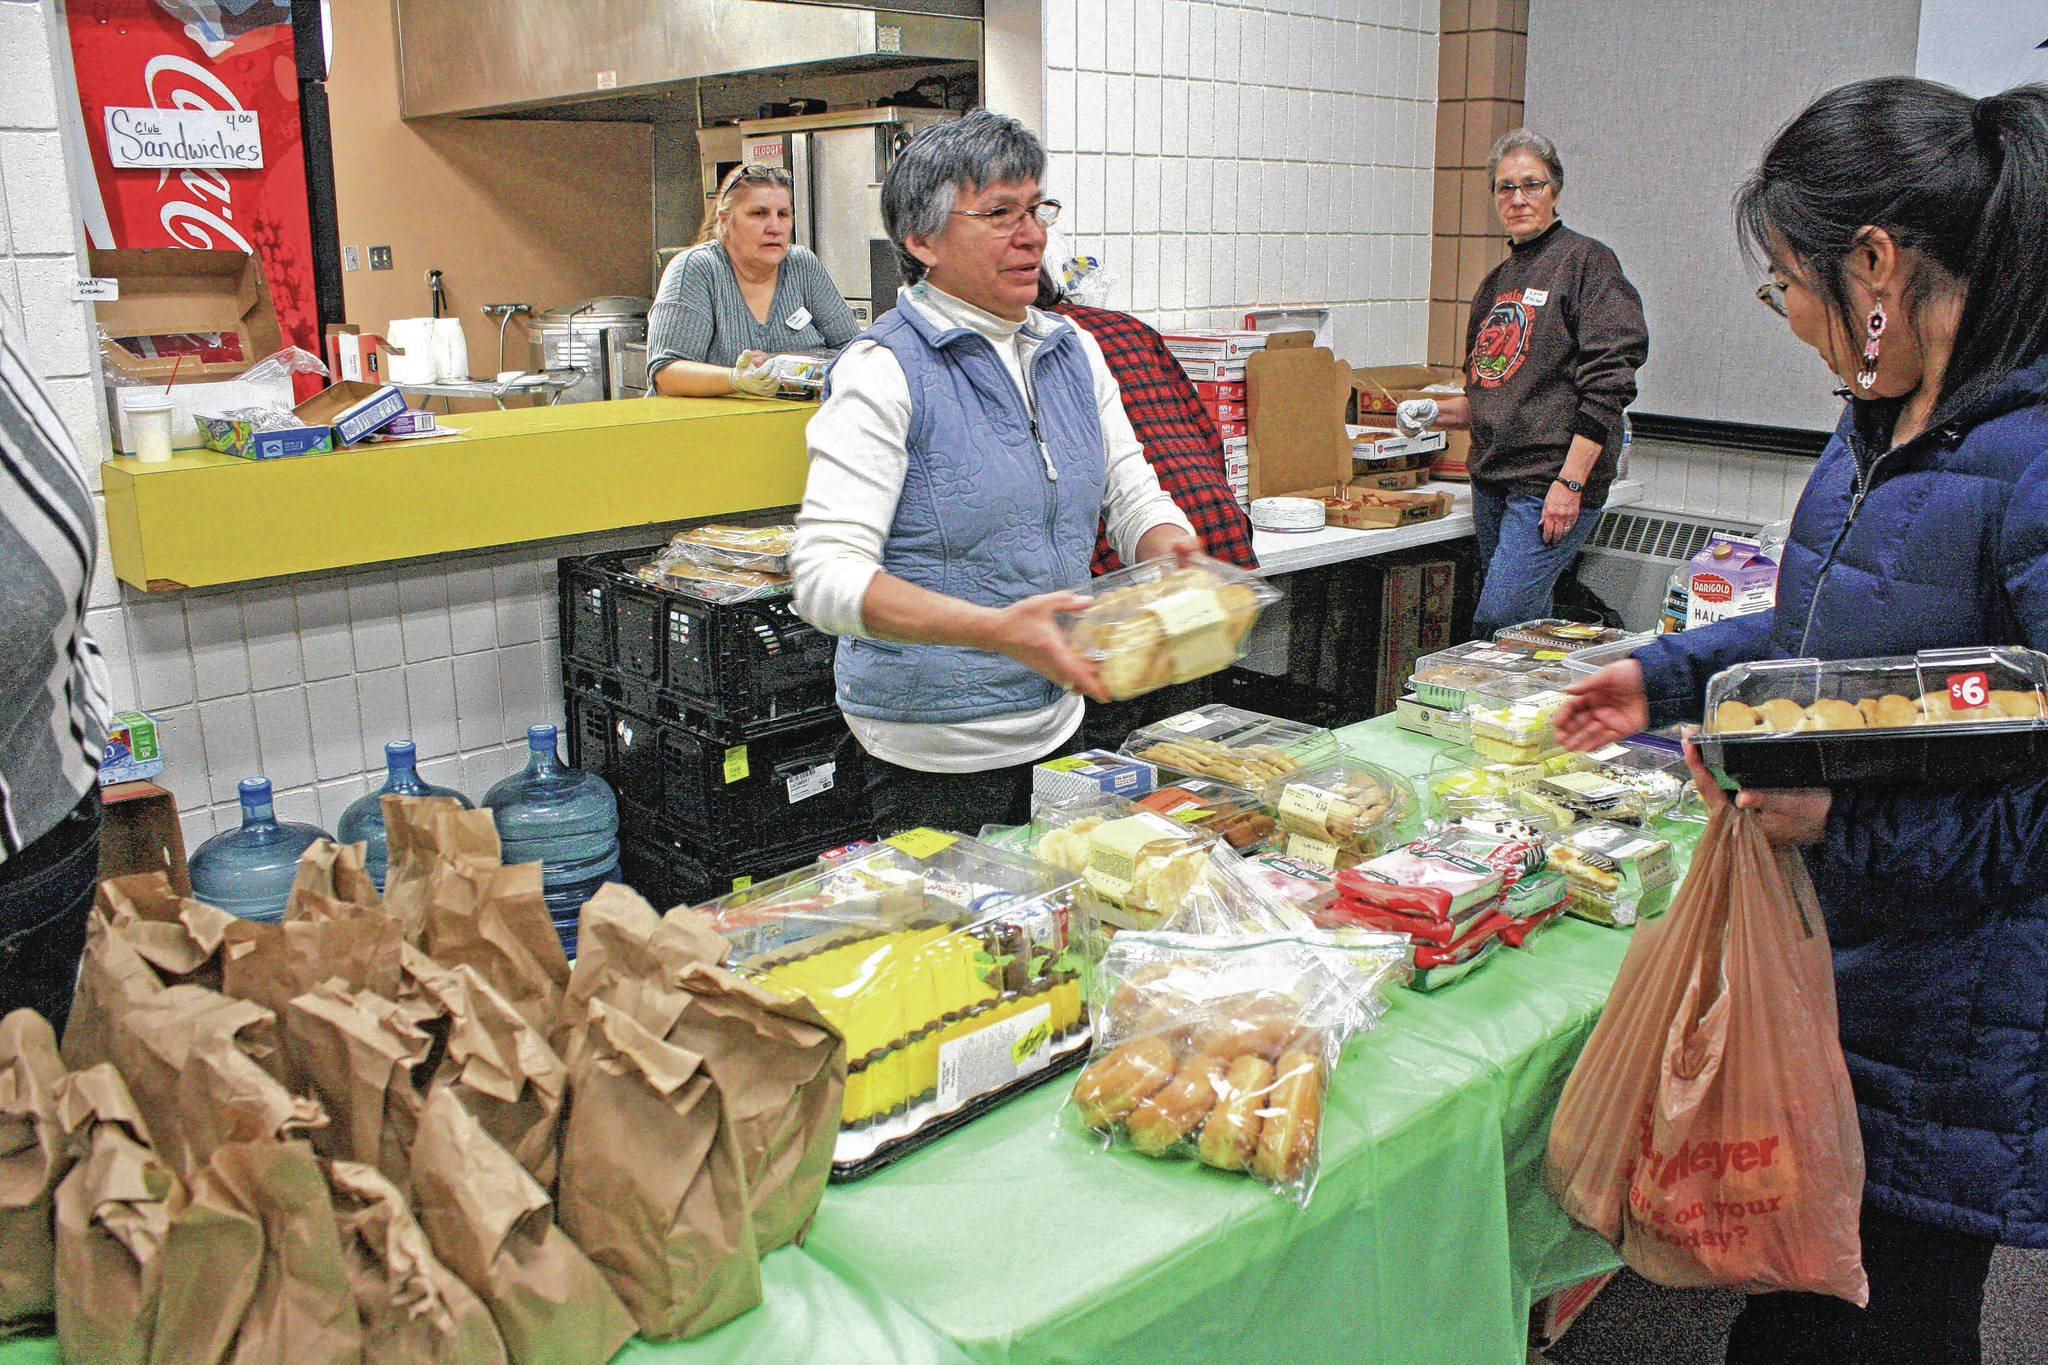 Erin Thompson / Peninsula Clarion                                Volunteers staff the kitchen and buffet line for Project Homeless Connect at the Soldotna Regional Sports Complex on Jan. 24, 2018. The annual event gathers service providers, nonprofits and volunteers to support members of the homeless community and those in need.